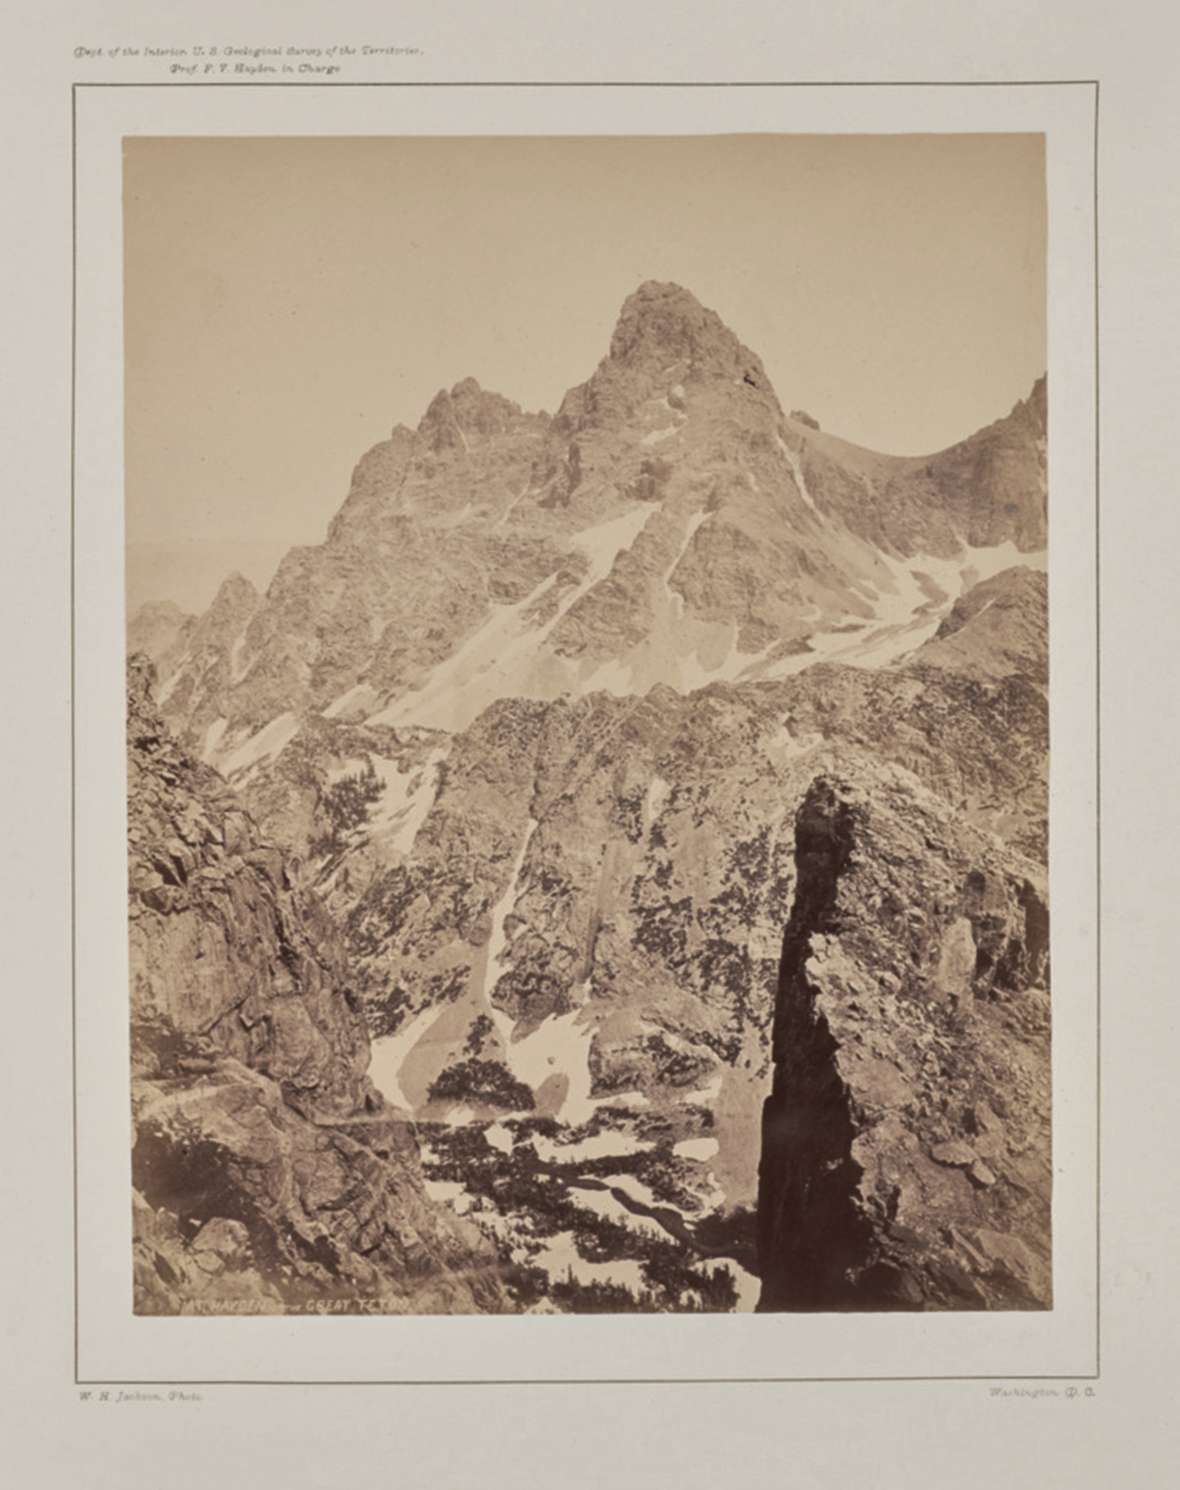 The Grand Teton from the top of Table Mountain on the Idaho side, by Hayden Expedition photographer William H. Jackson, August 1872. Note the absence of snow above the Lower Saddle at the right. Getty Museum.